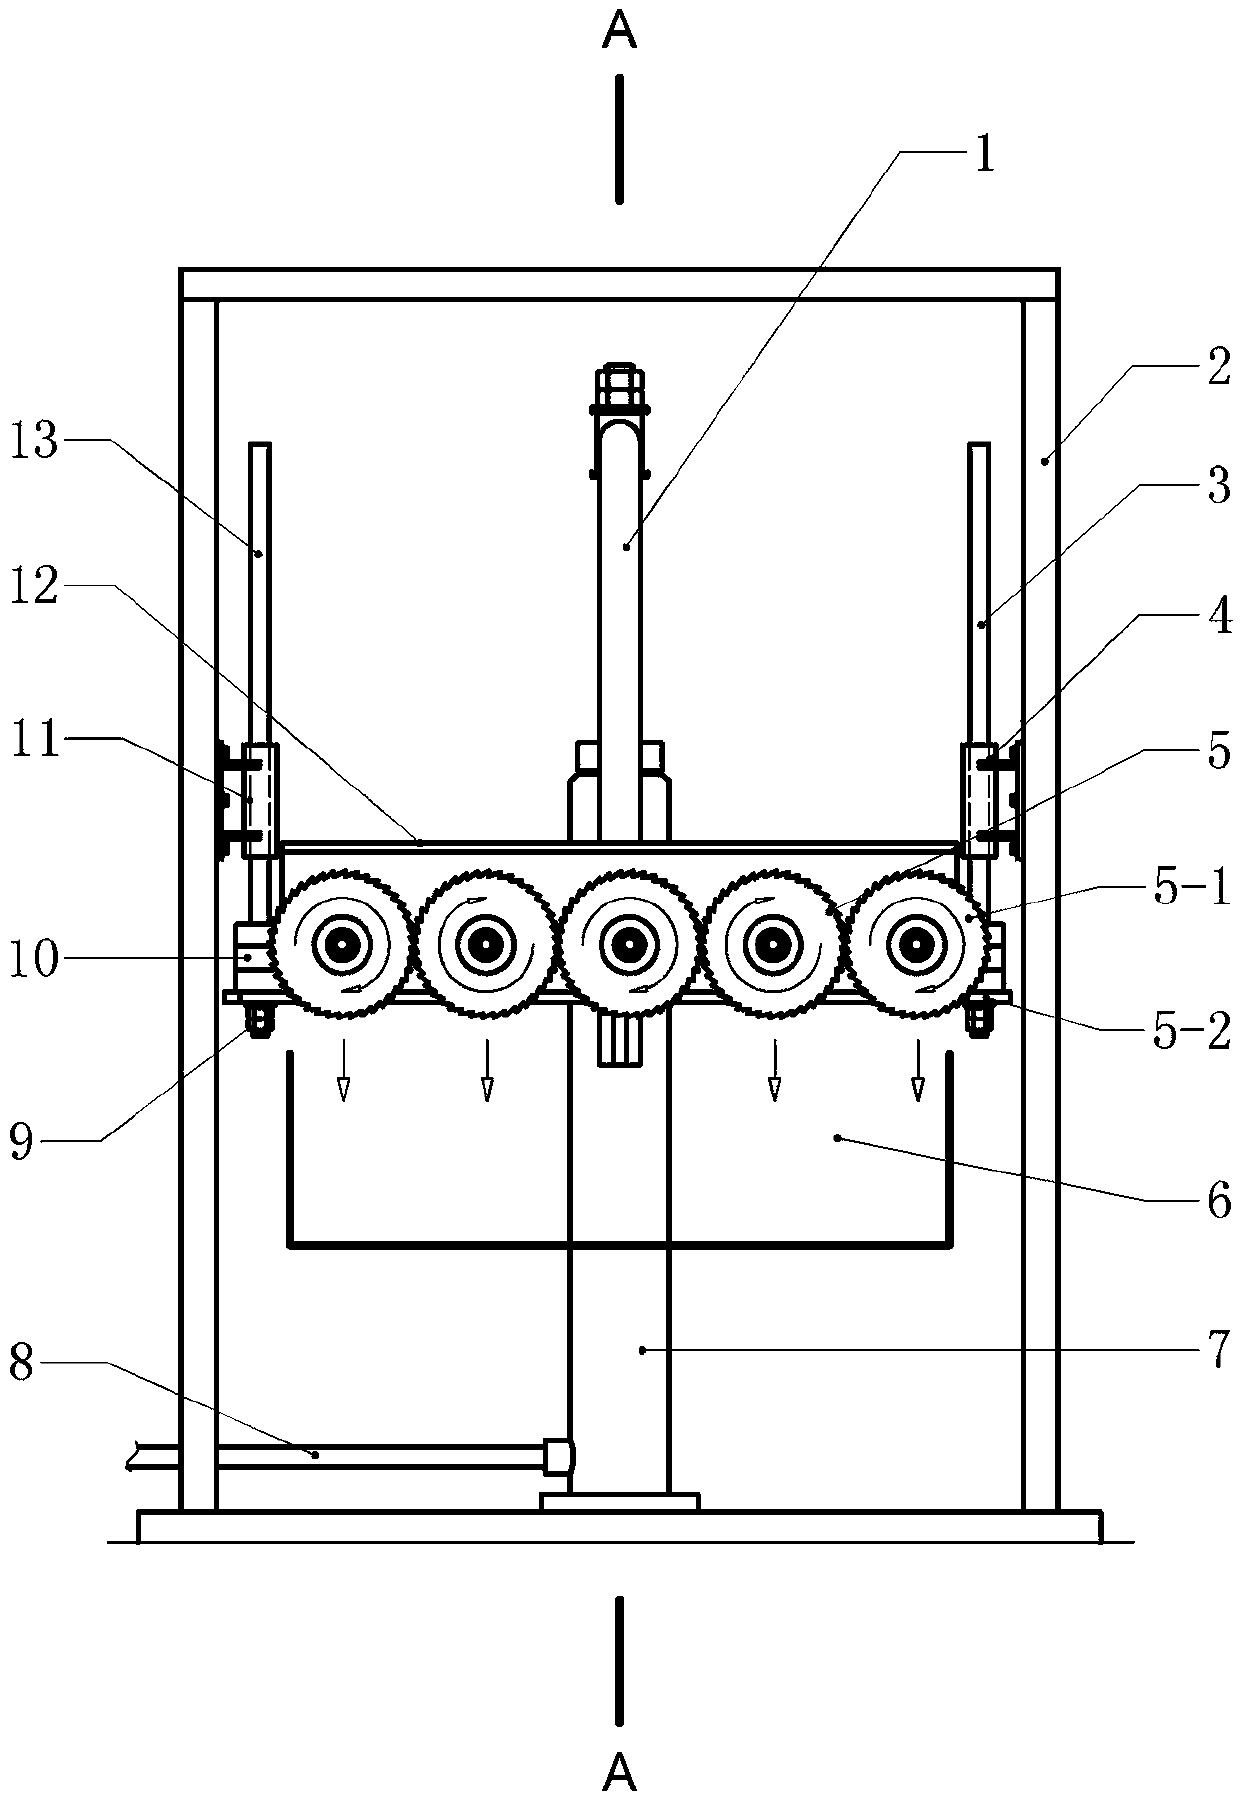 Hydraulic coordinated biomass sawing equipment